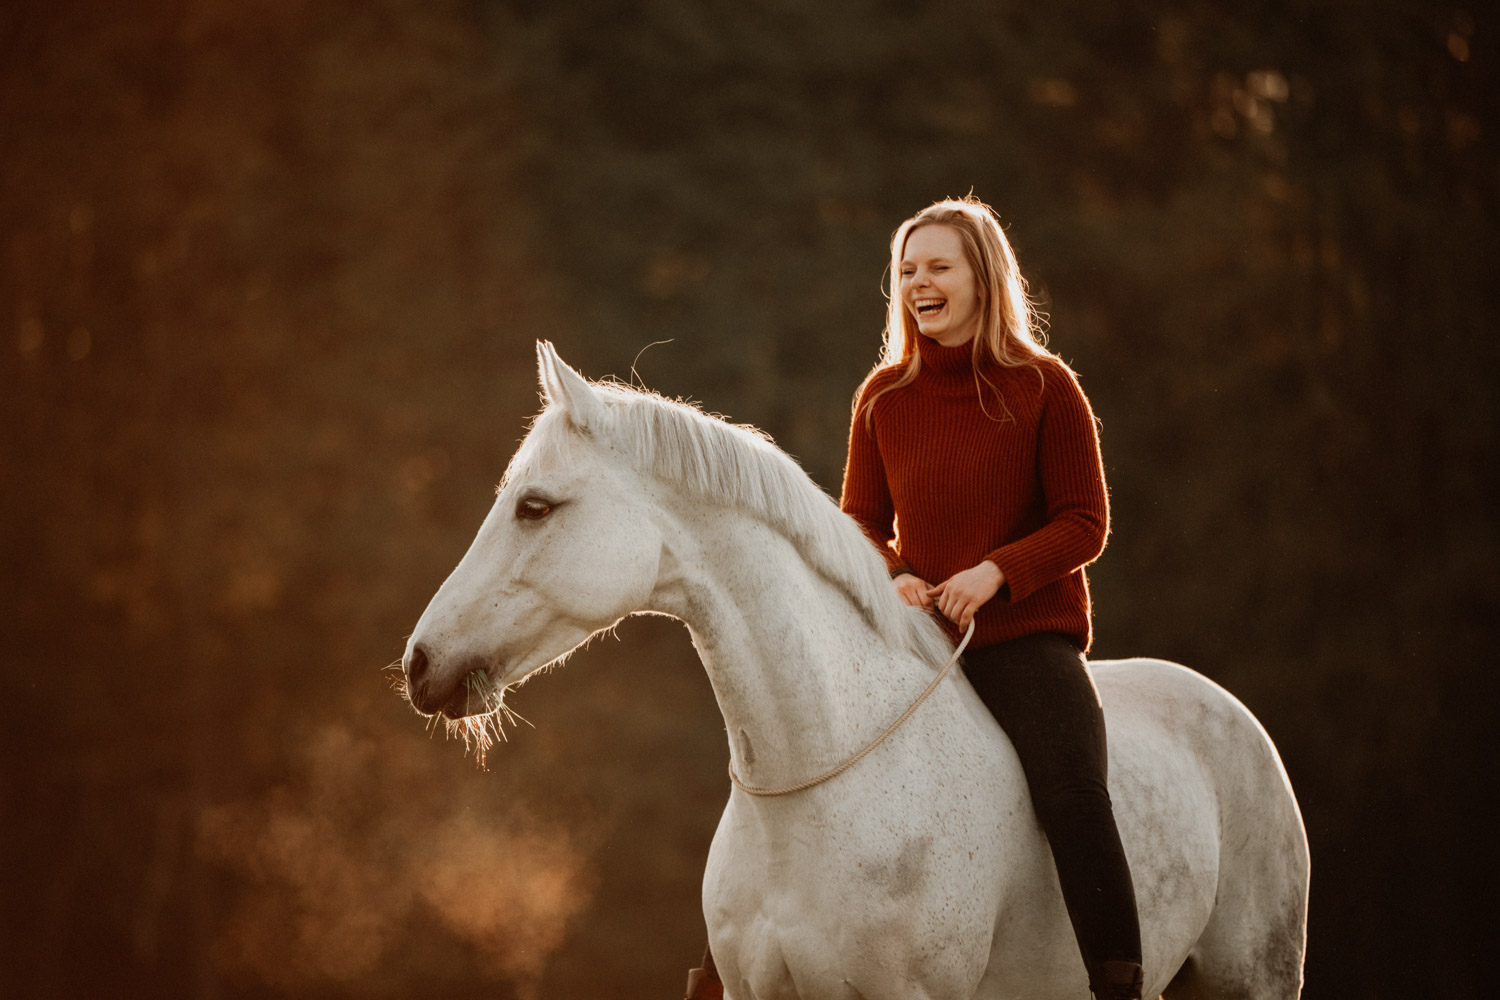 Tips and tricks for editing horse photography with Adobe Lightroom or Photoshop presets